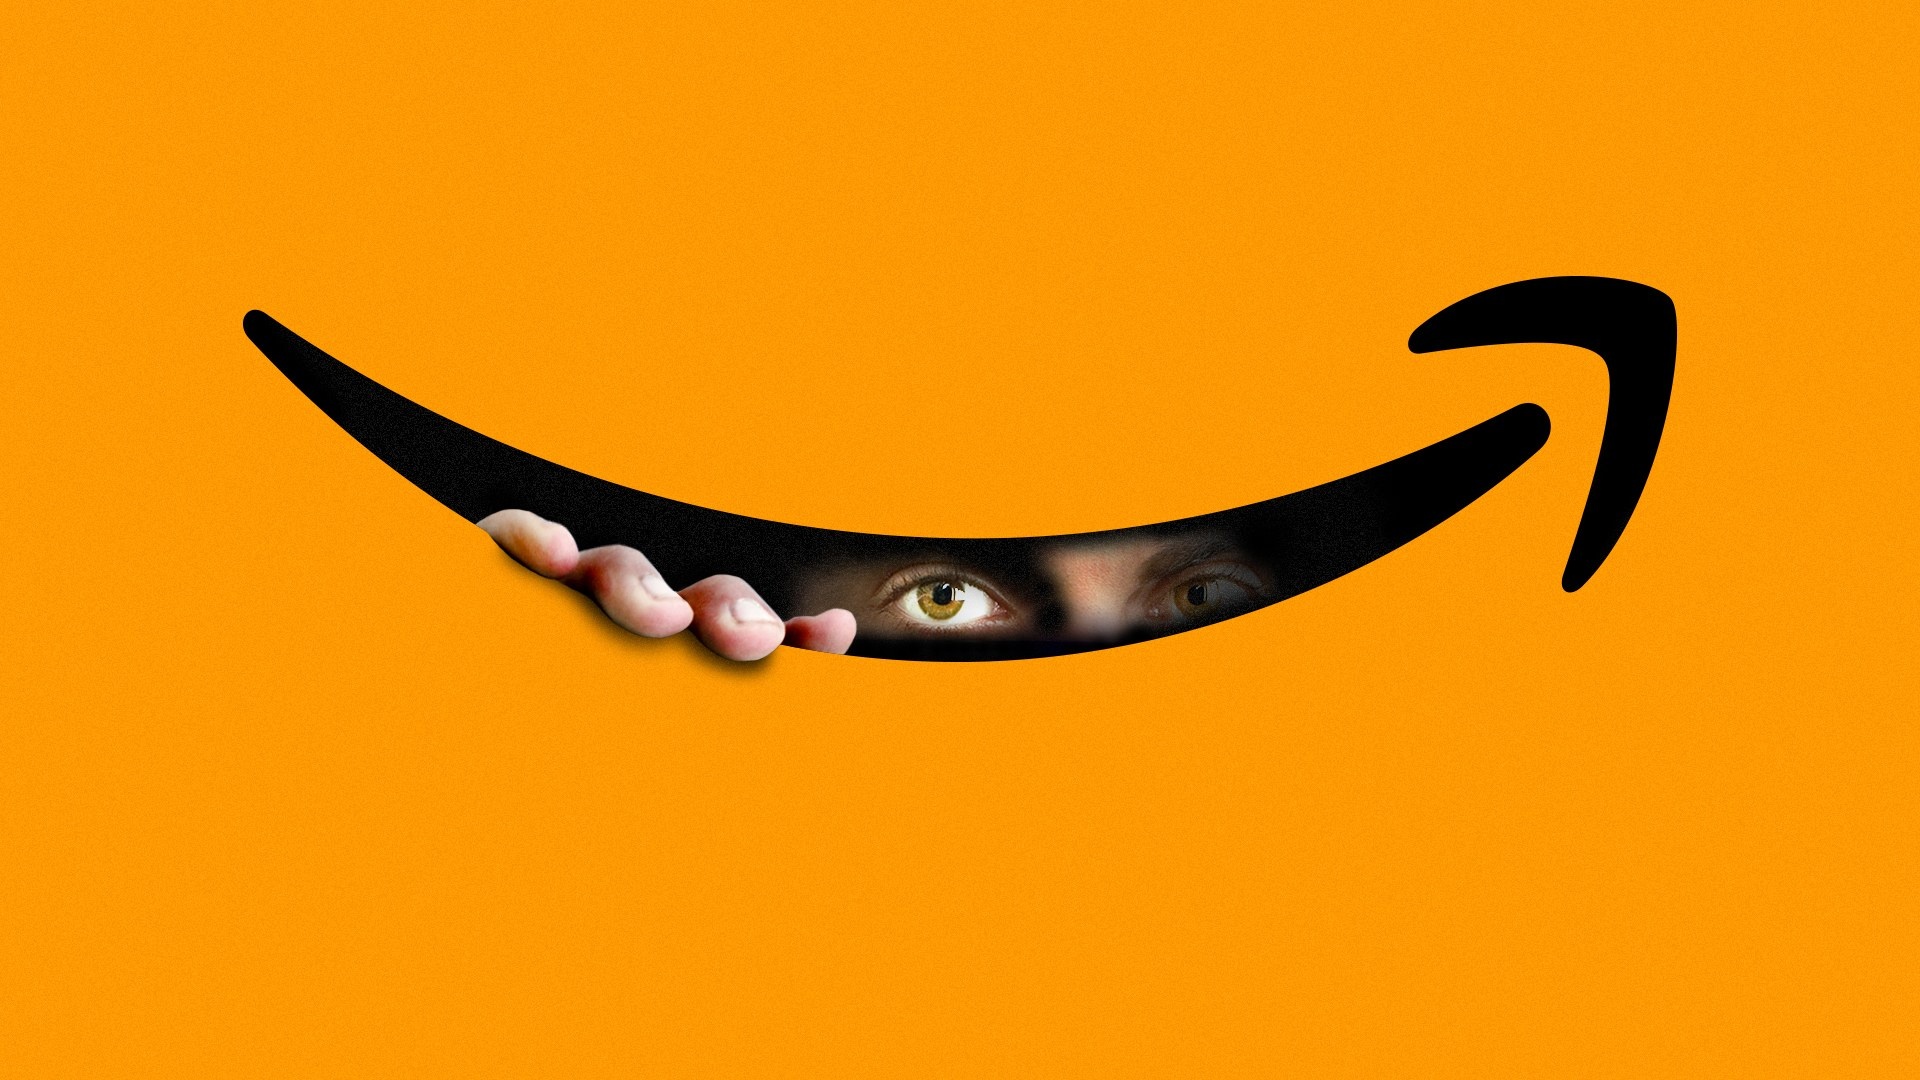 Amazon: Creepy logo, Acquired the Internet Movie Database in 1998. 1920x1080 Full HD Wallpaper.